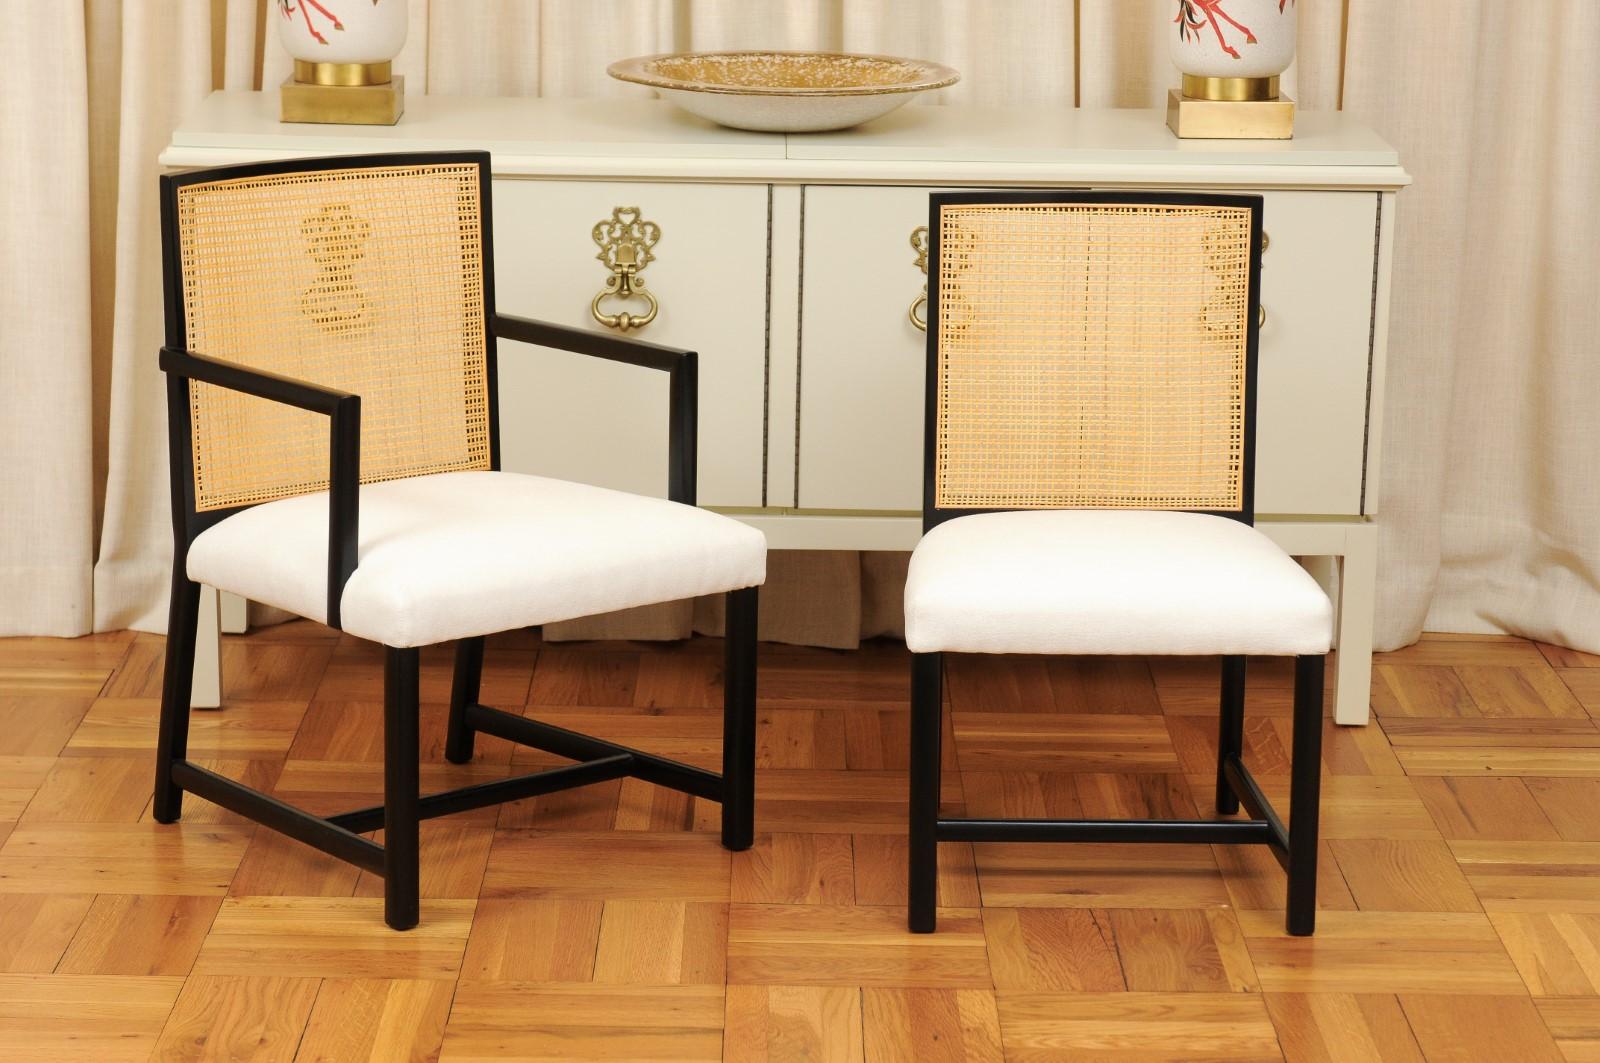 These magnificent dining chairs are shipped as professionally photographed and described in the listing narrative: meticulously professionally restored and completely installation ready.  This large set is unique on the World market. Expert custom